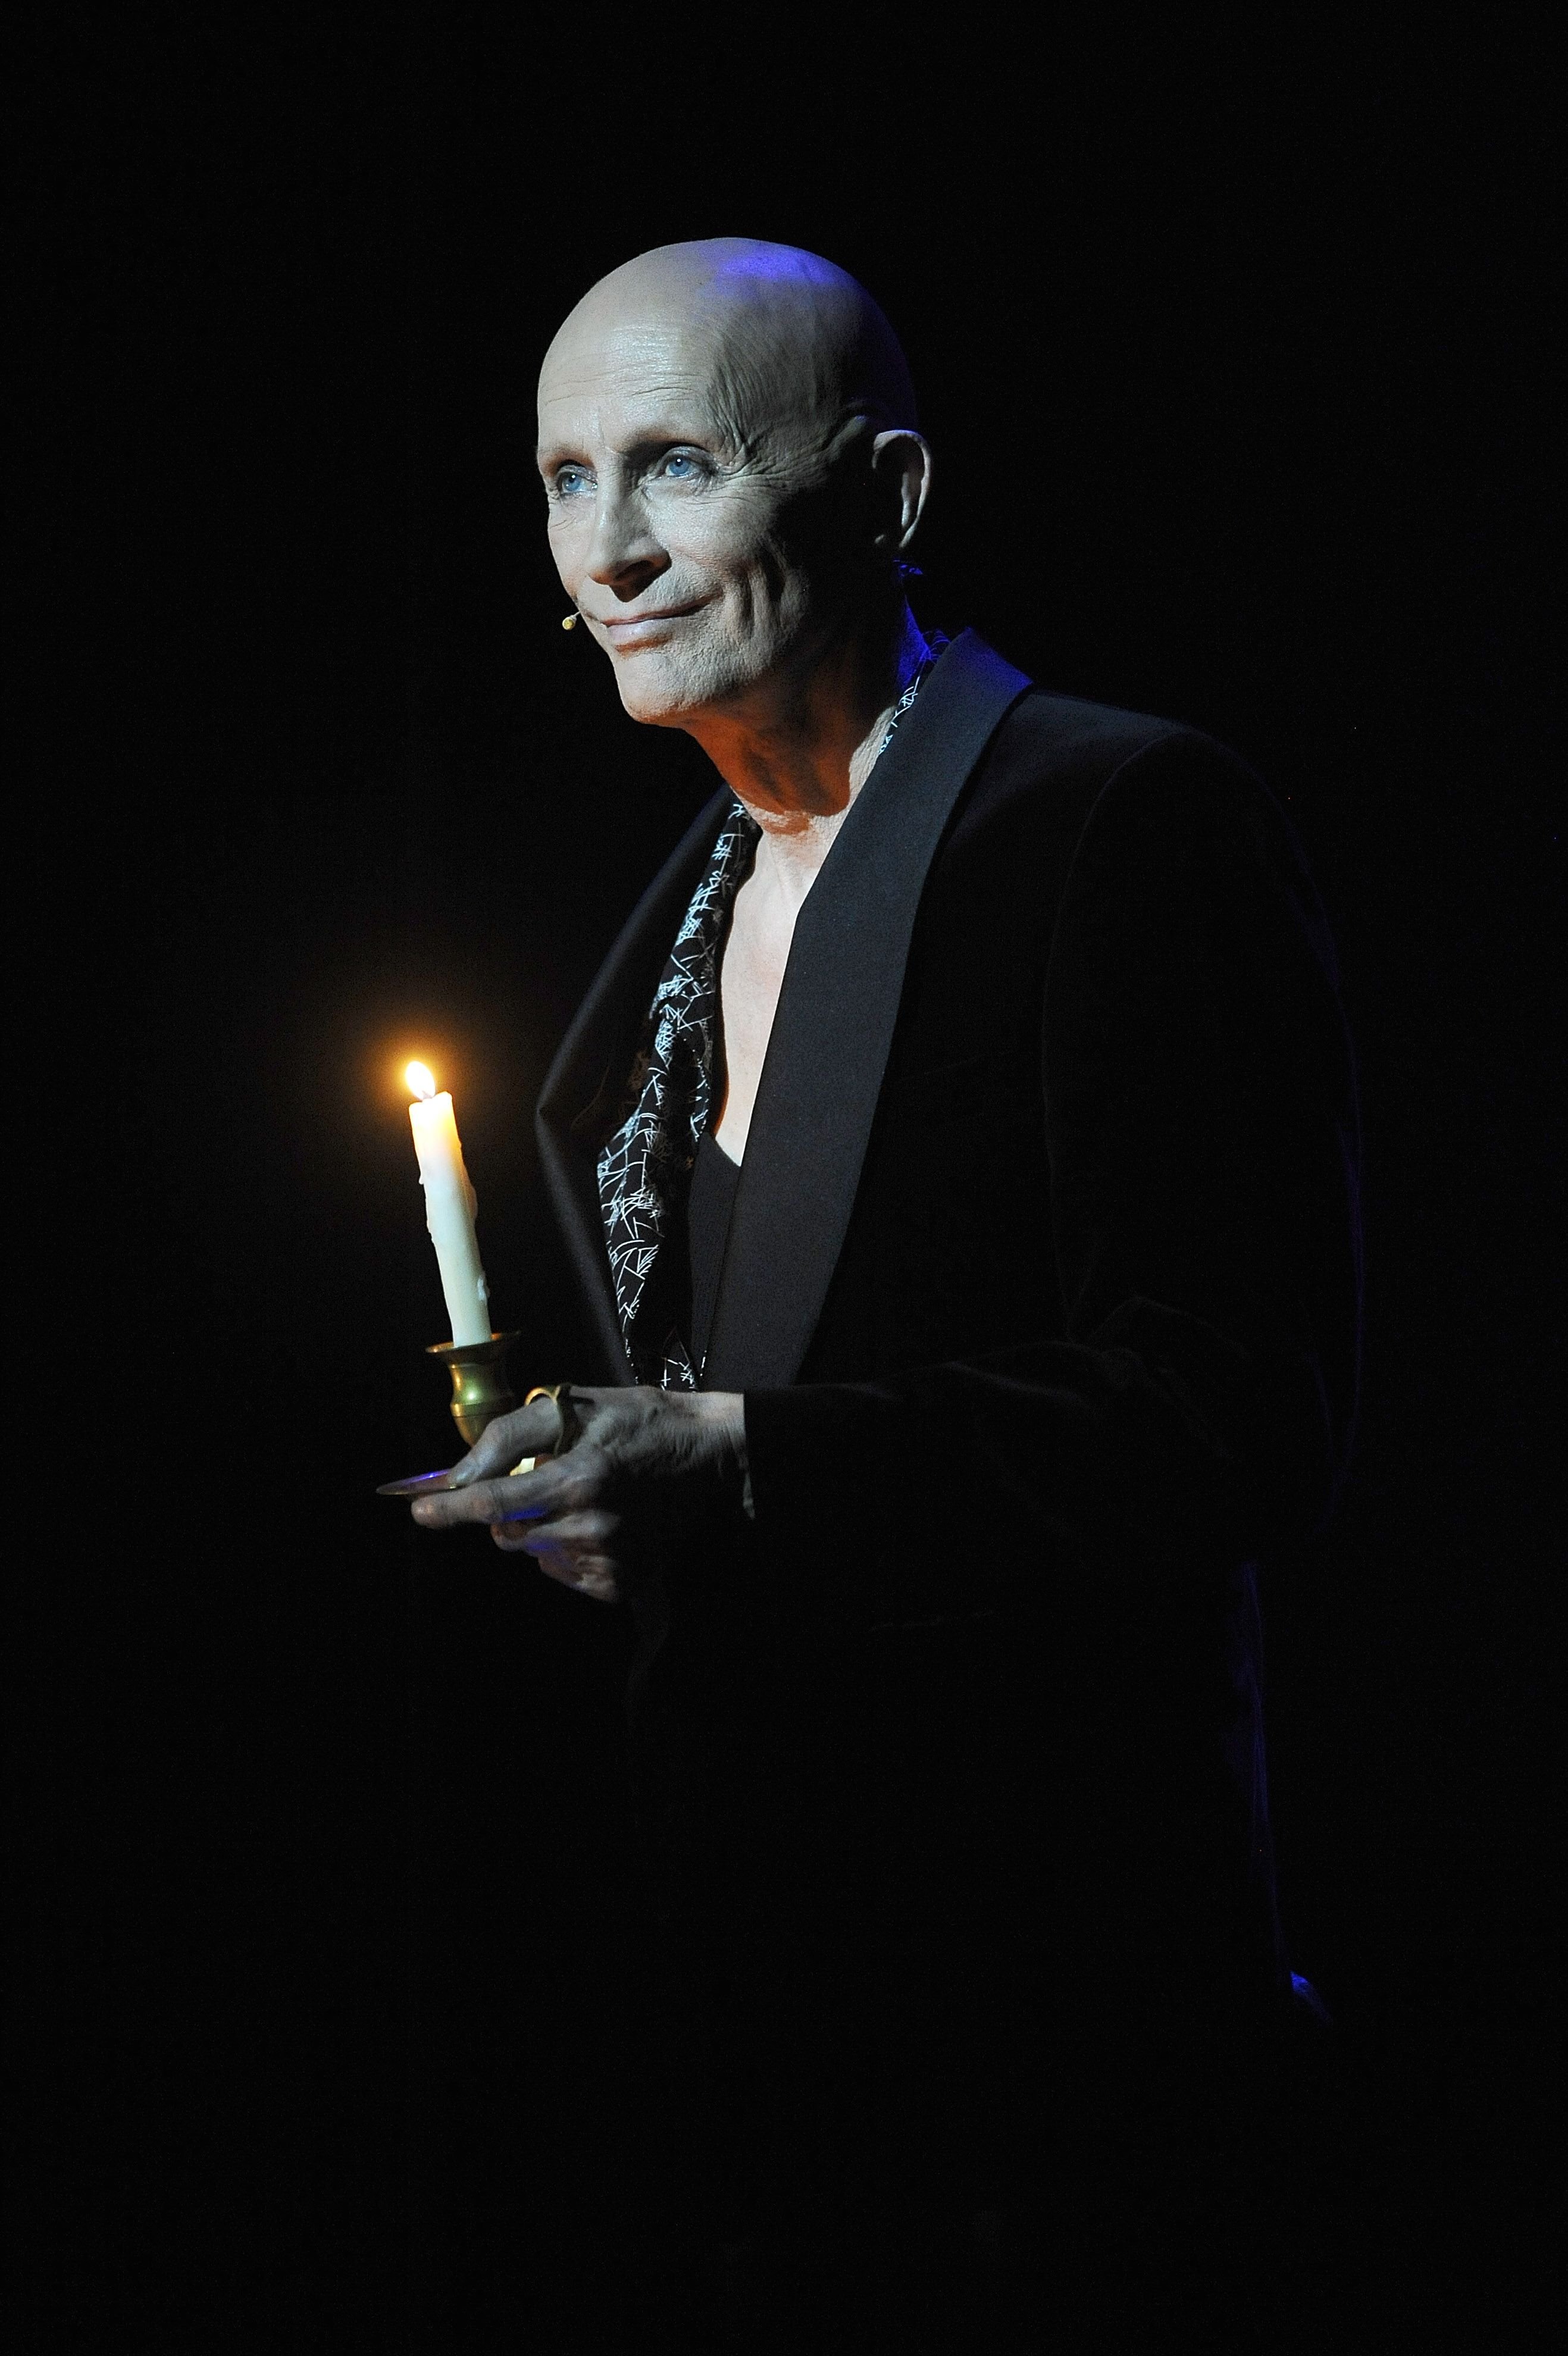 Richard O'Brien at the Gala Charity of Richard O'Brien's Rocky Horror Show in Aide of Amnesty International in 2015 in London, England